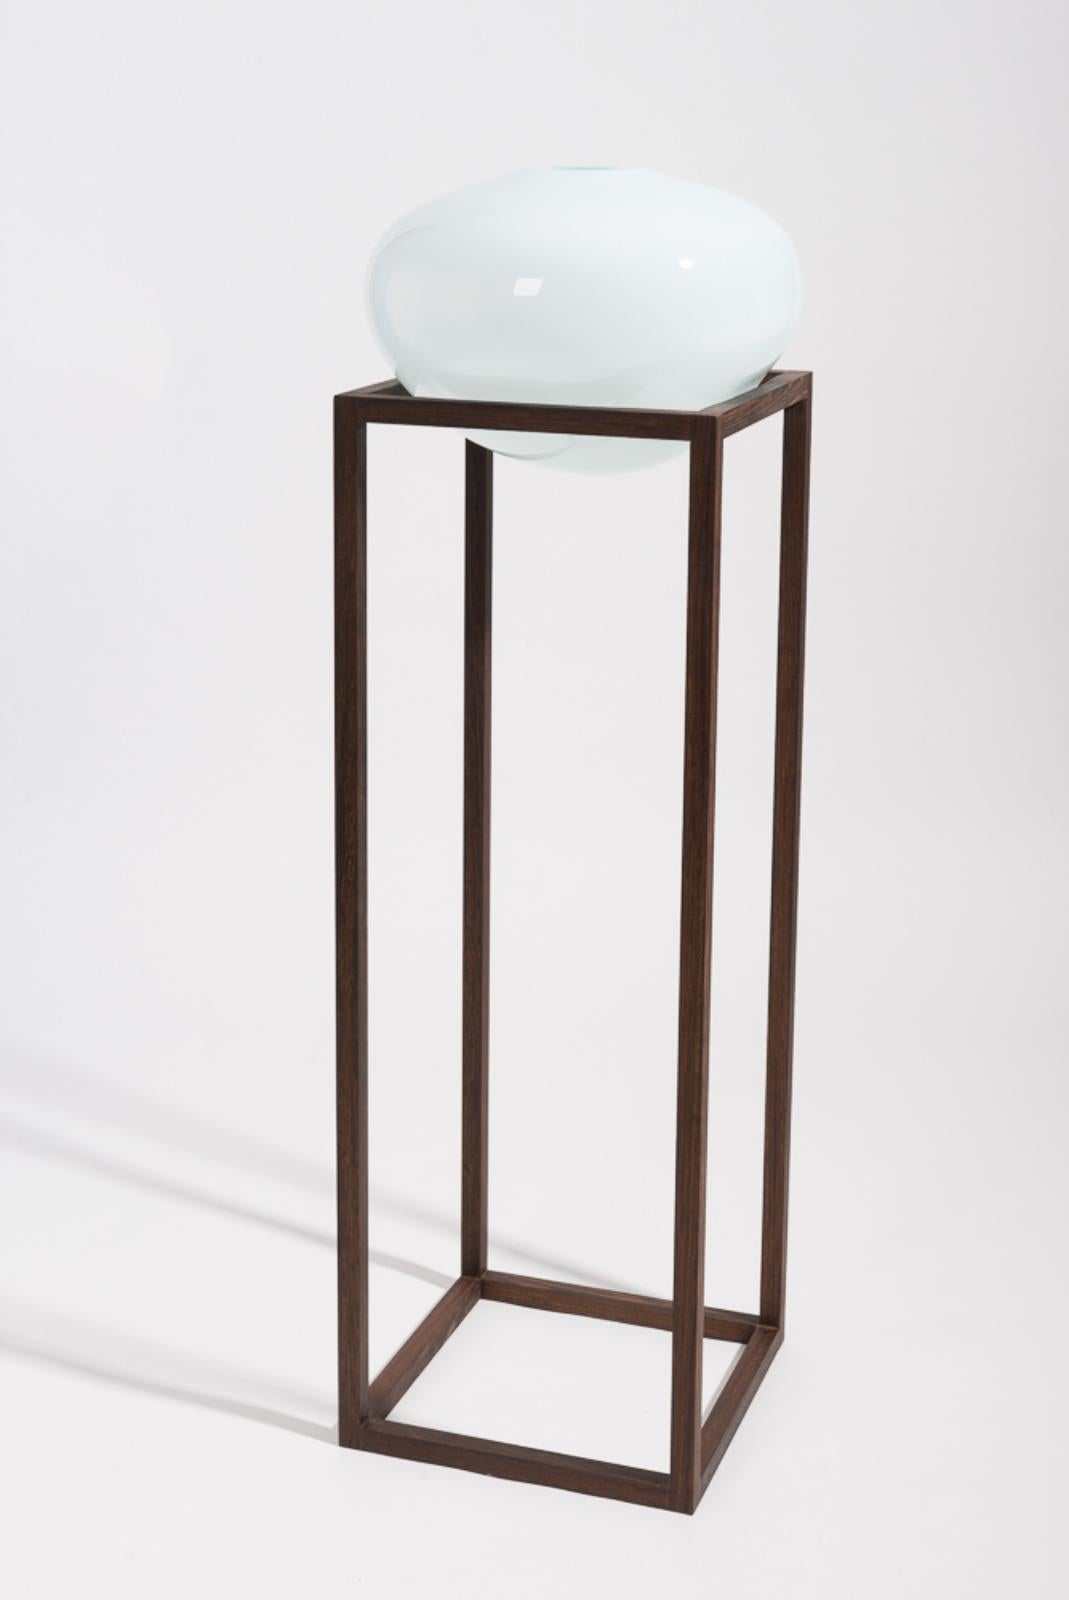 Set of 2 high round square green vase by Studio Thier & van Daalen
Dimensions: W 36 x D 36 x H 120 cm
Materials: wood, glass

When blowing soap bubbles in the air Iris & Ruben had the dream to capture these temporary beauties in a tendril frame.